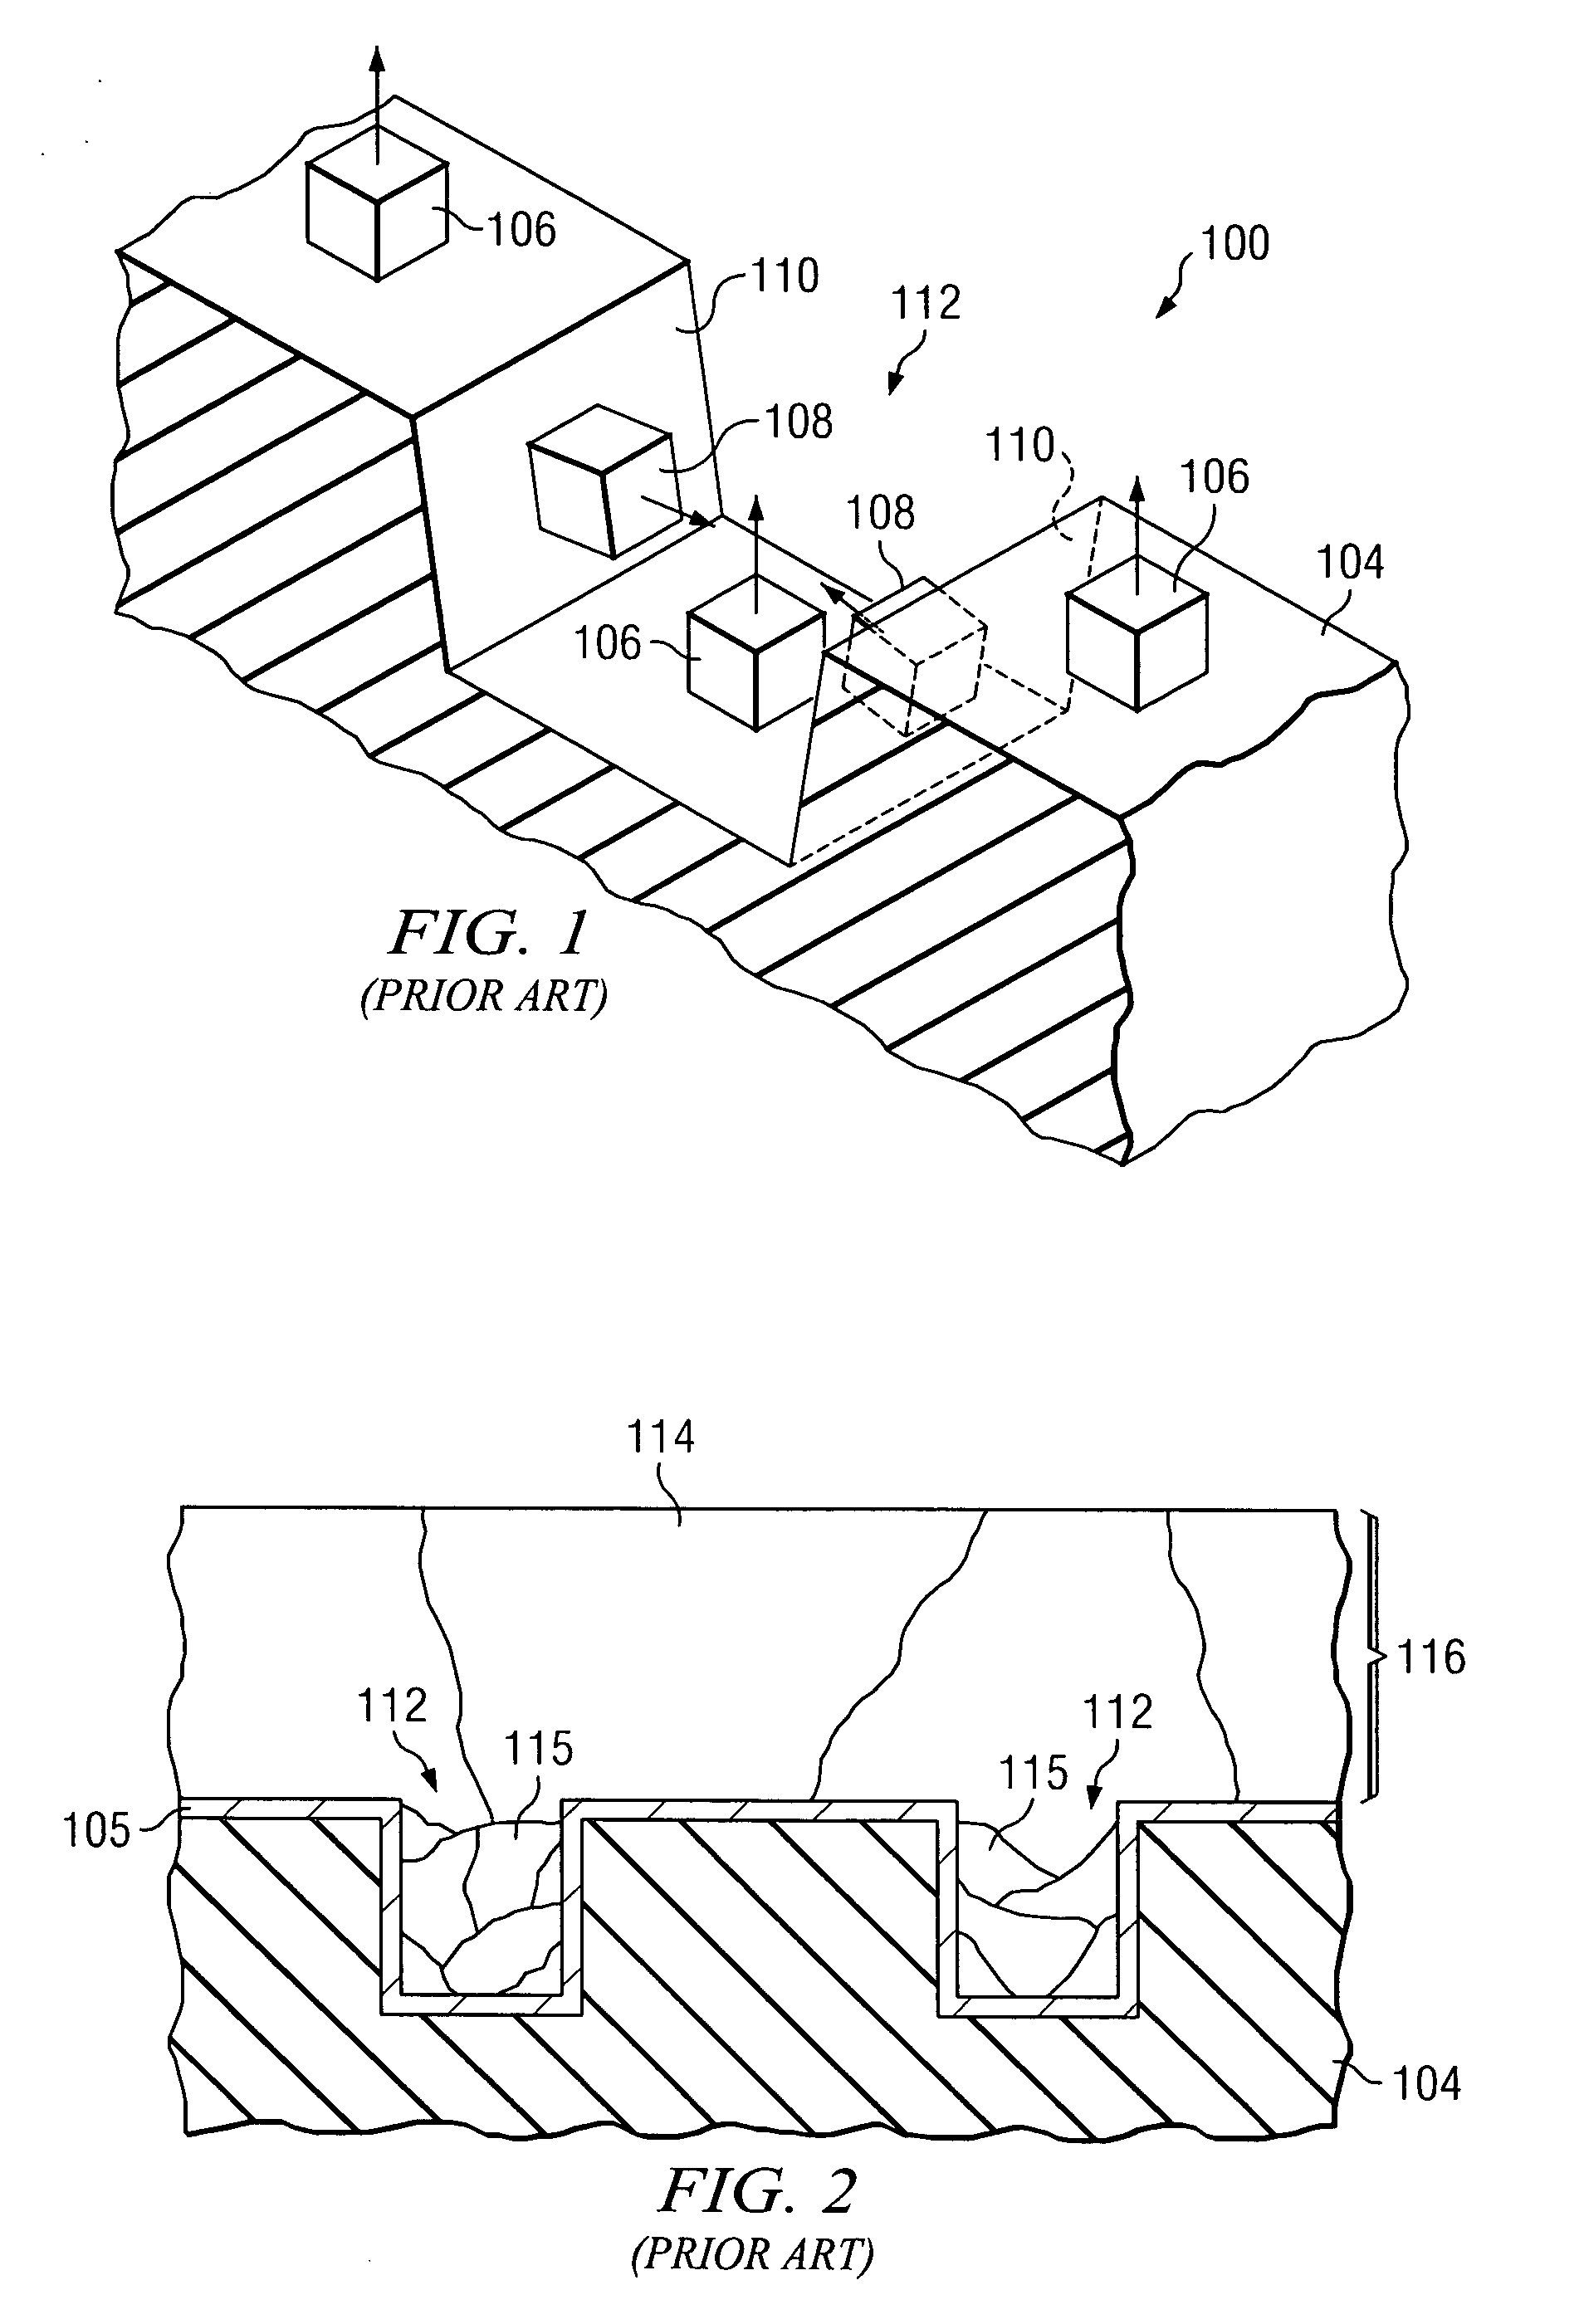 Barrier layers for conductive features